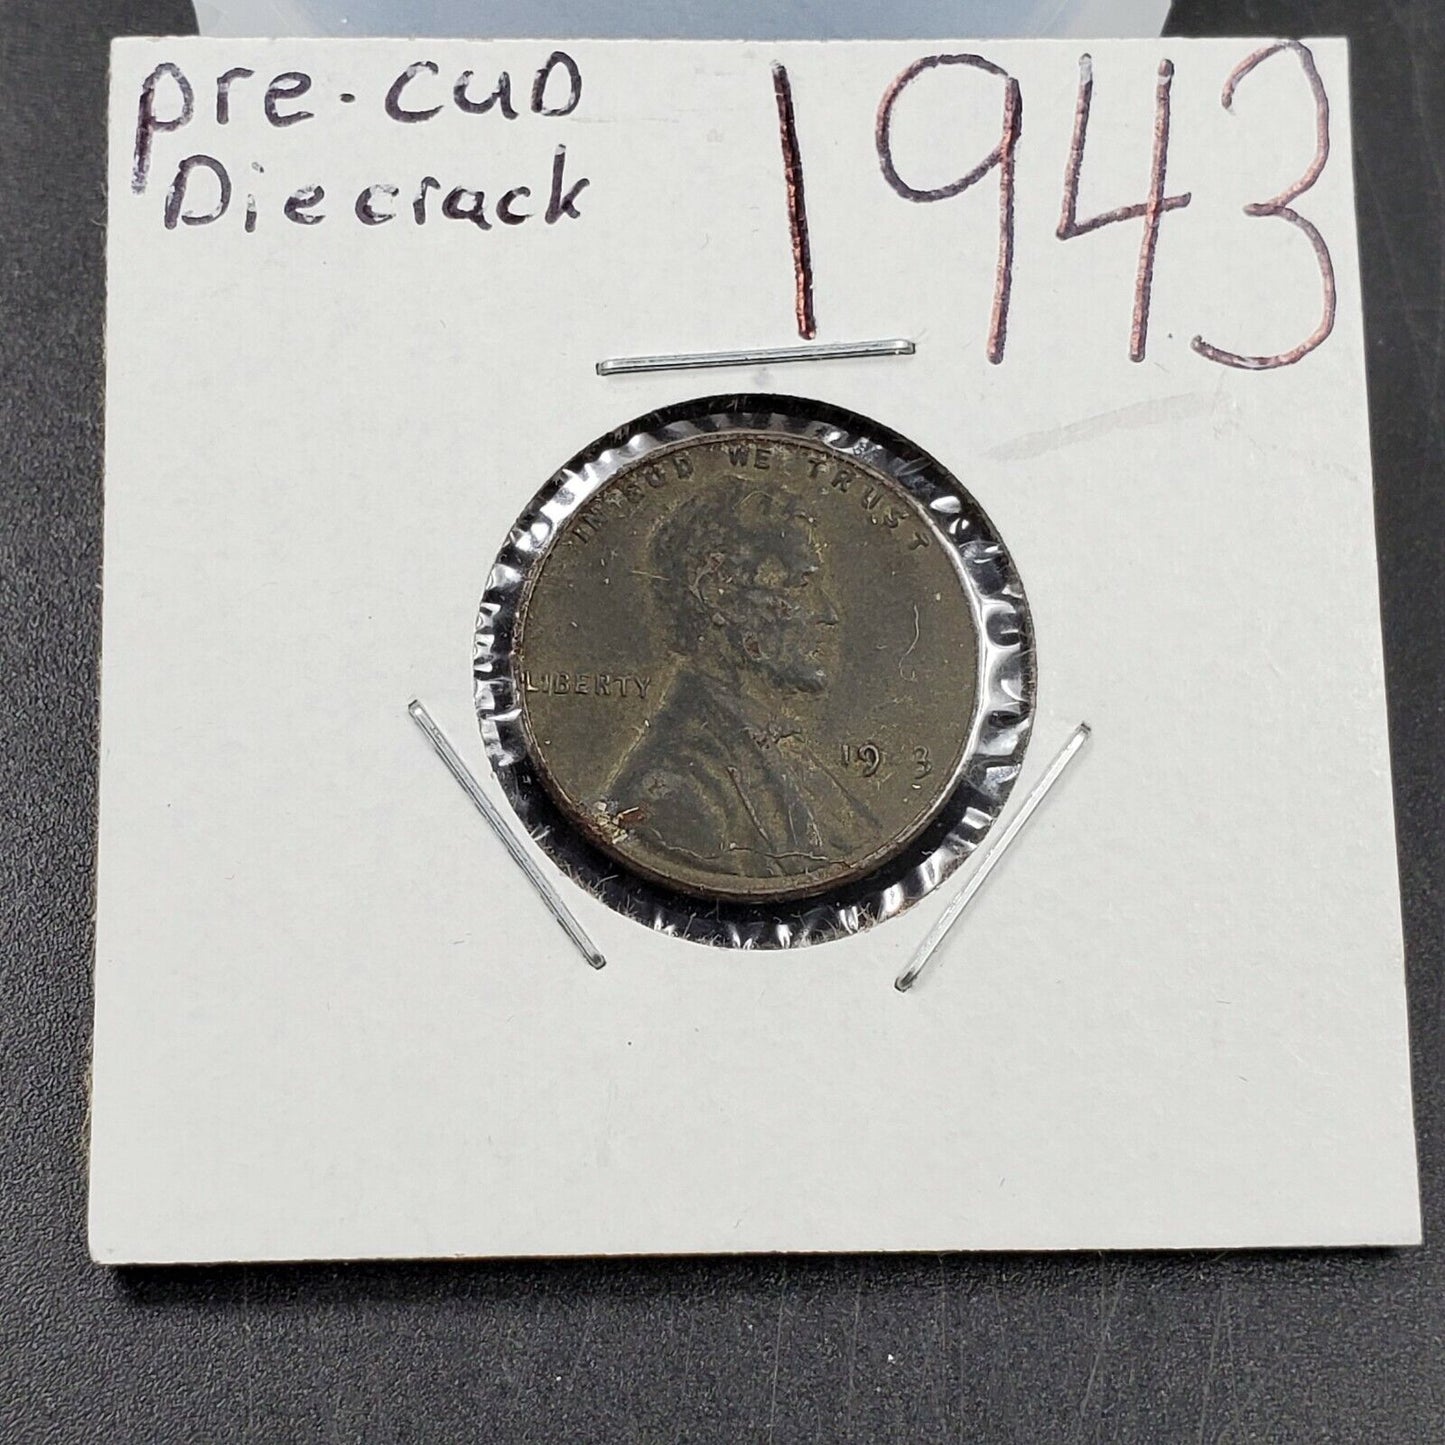 1943 1c Steel Wheat Lincoln Cent Penny Coin Pre Cudd Die Crack Obverse Circ